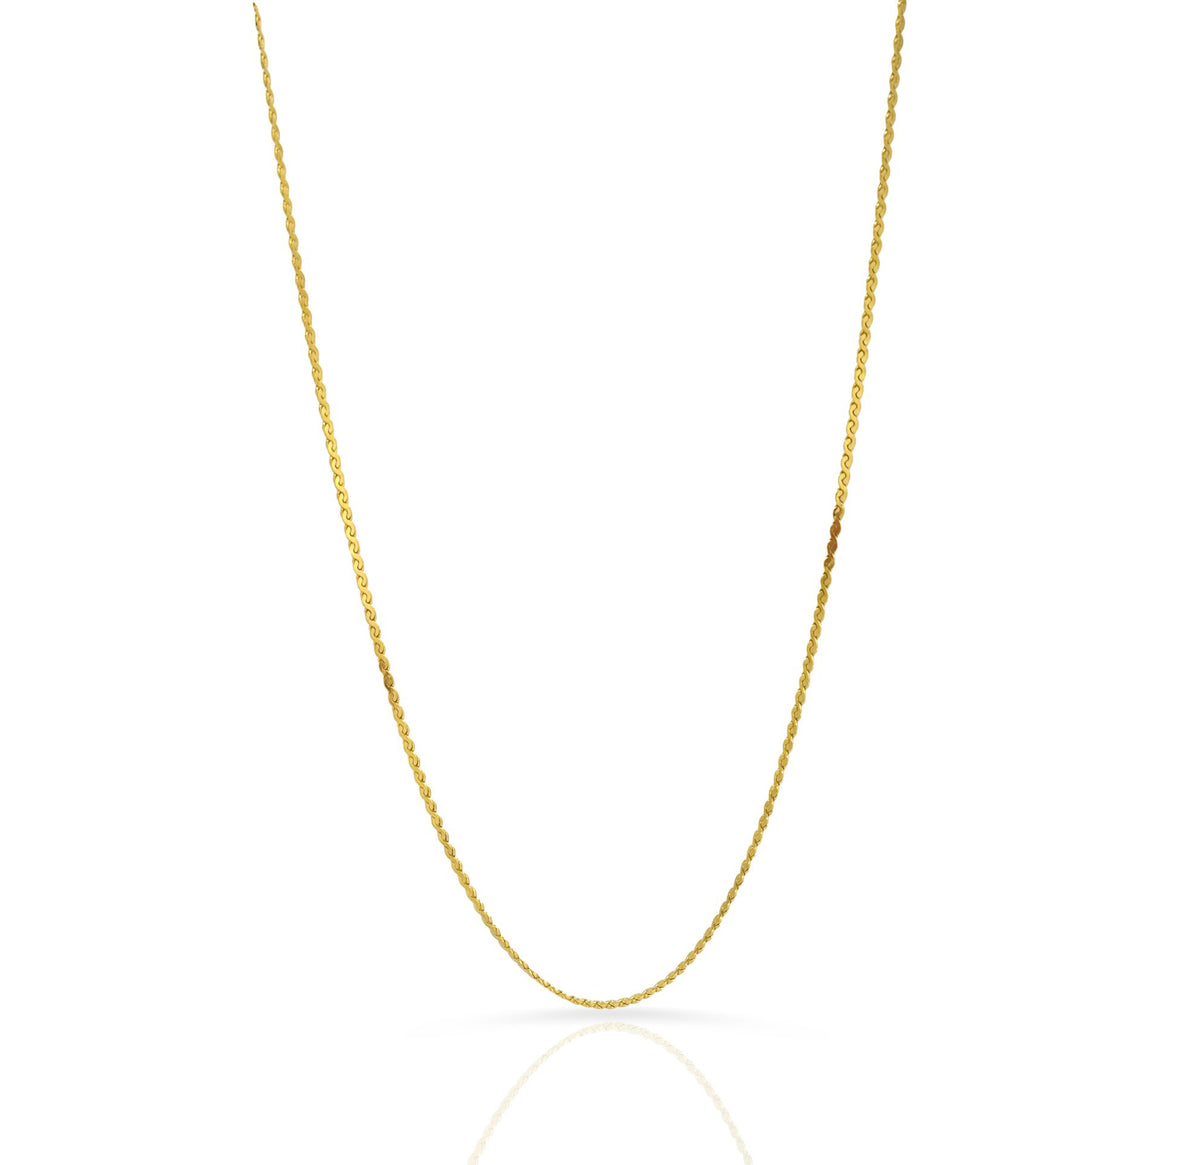 FAYE DAINTY THIN GOLD CHAIN NECKLACE - SAMPLE